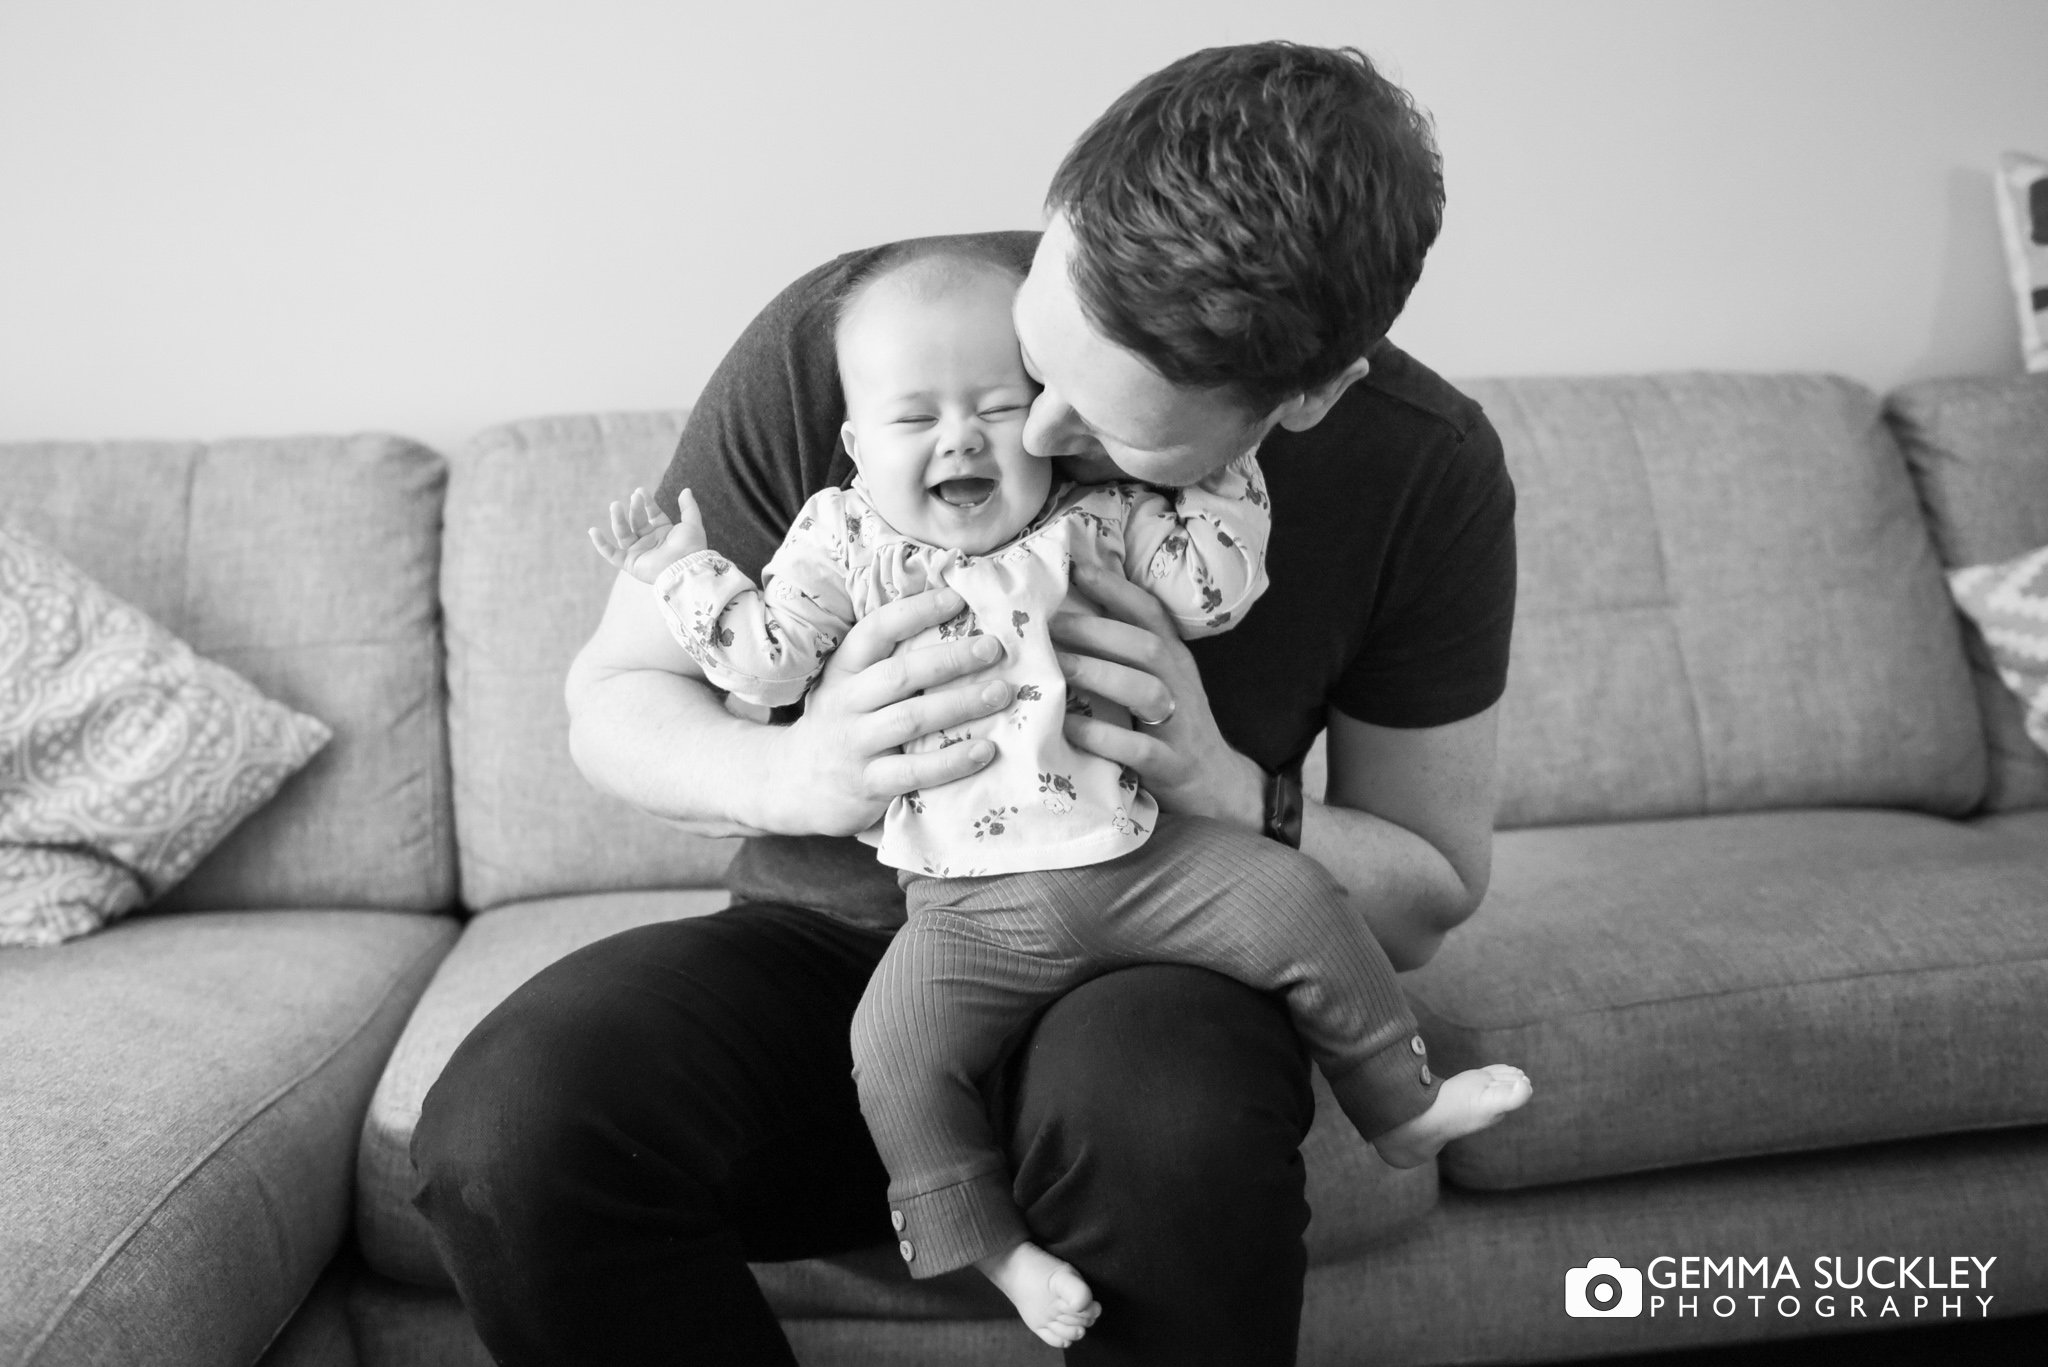 a baby giggling as her dad kisses her cheek